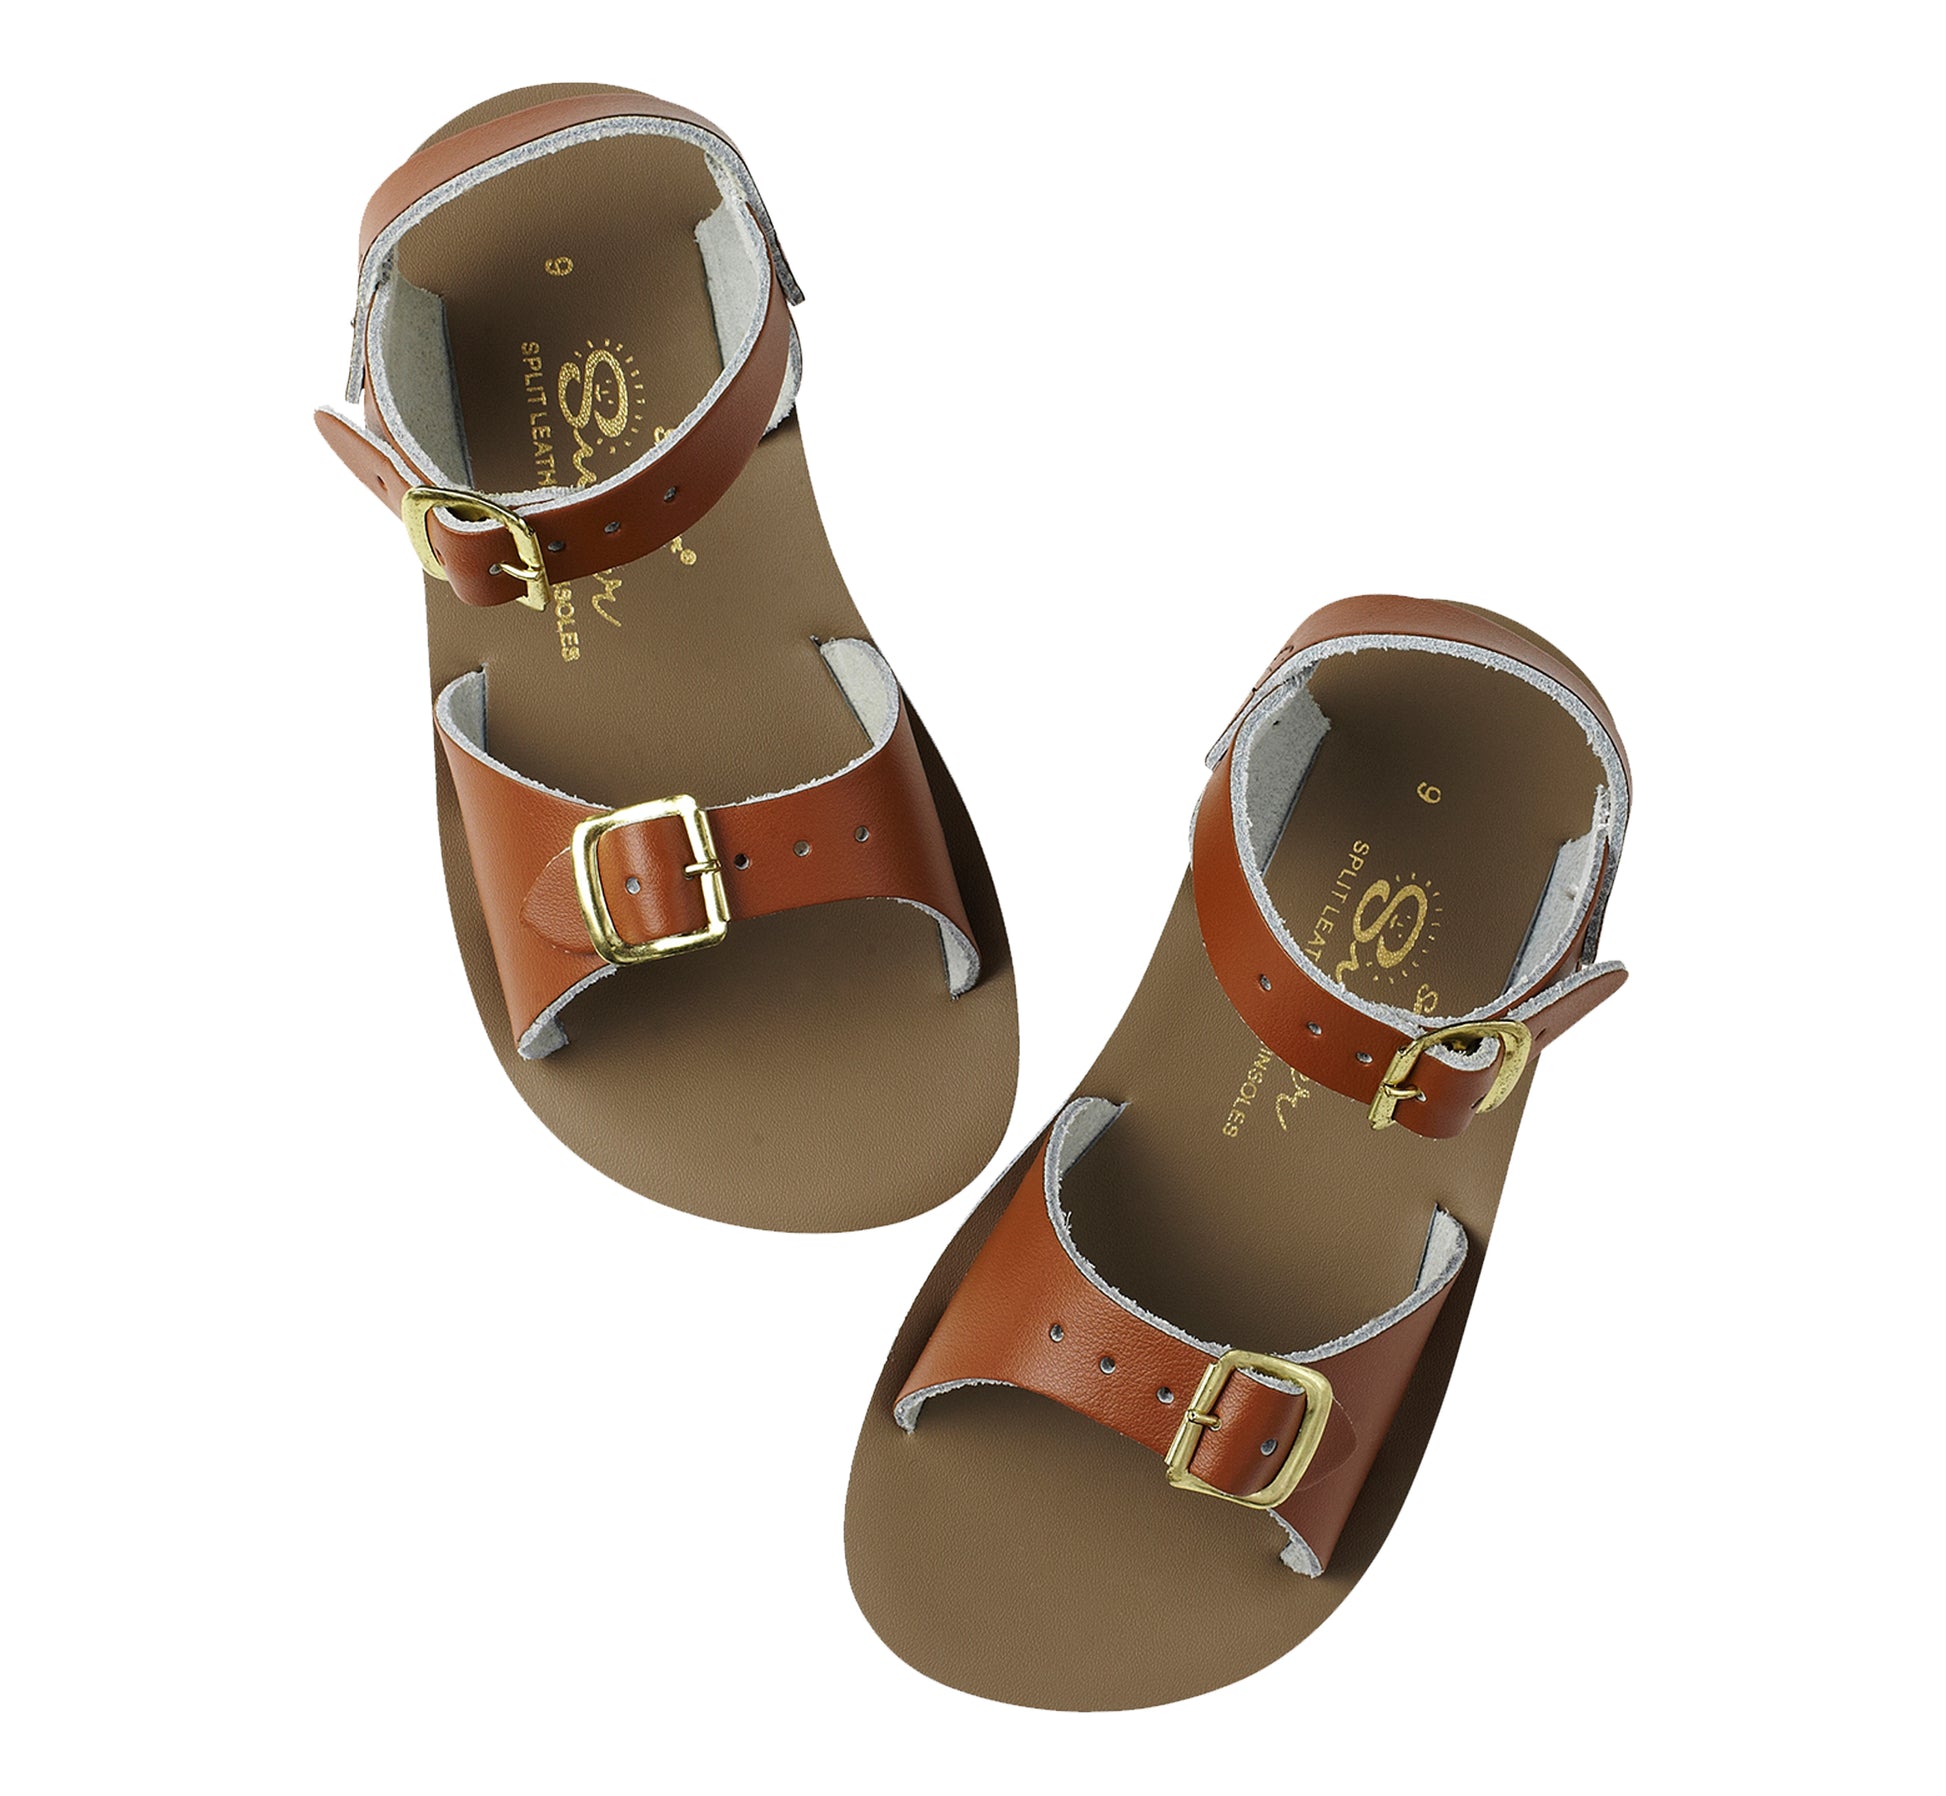 A unisex sandal by Salt Water Sandals in tan with double buckle fastening across the instep and around the ankle. Open Toe and Sling-back. Top view.